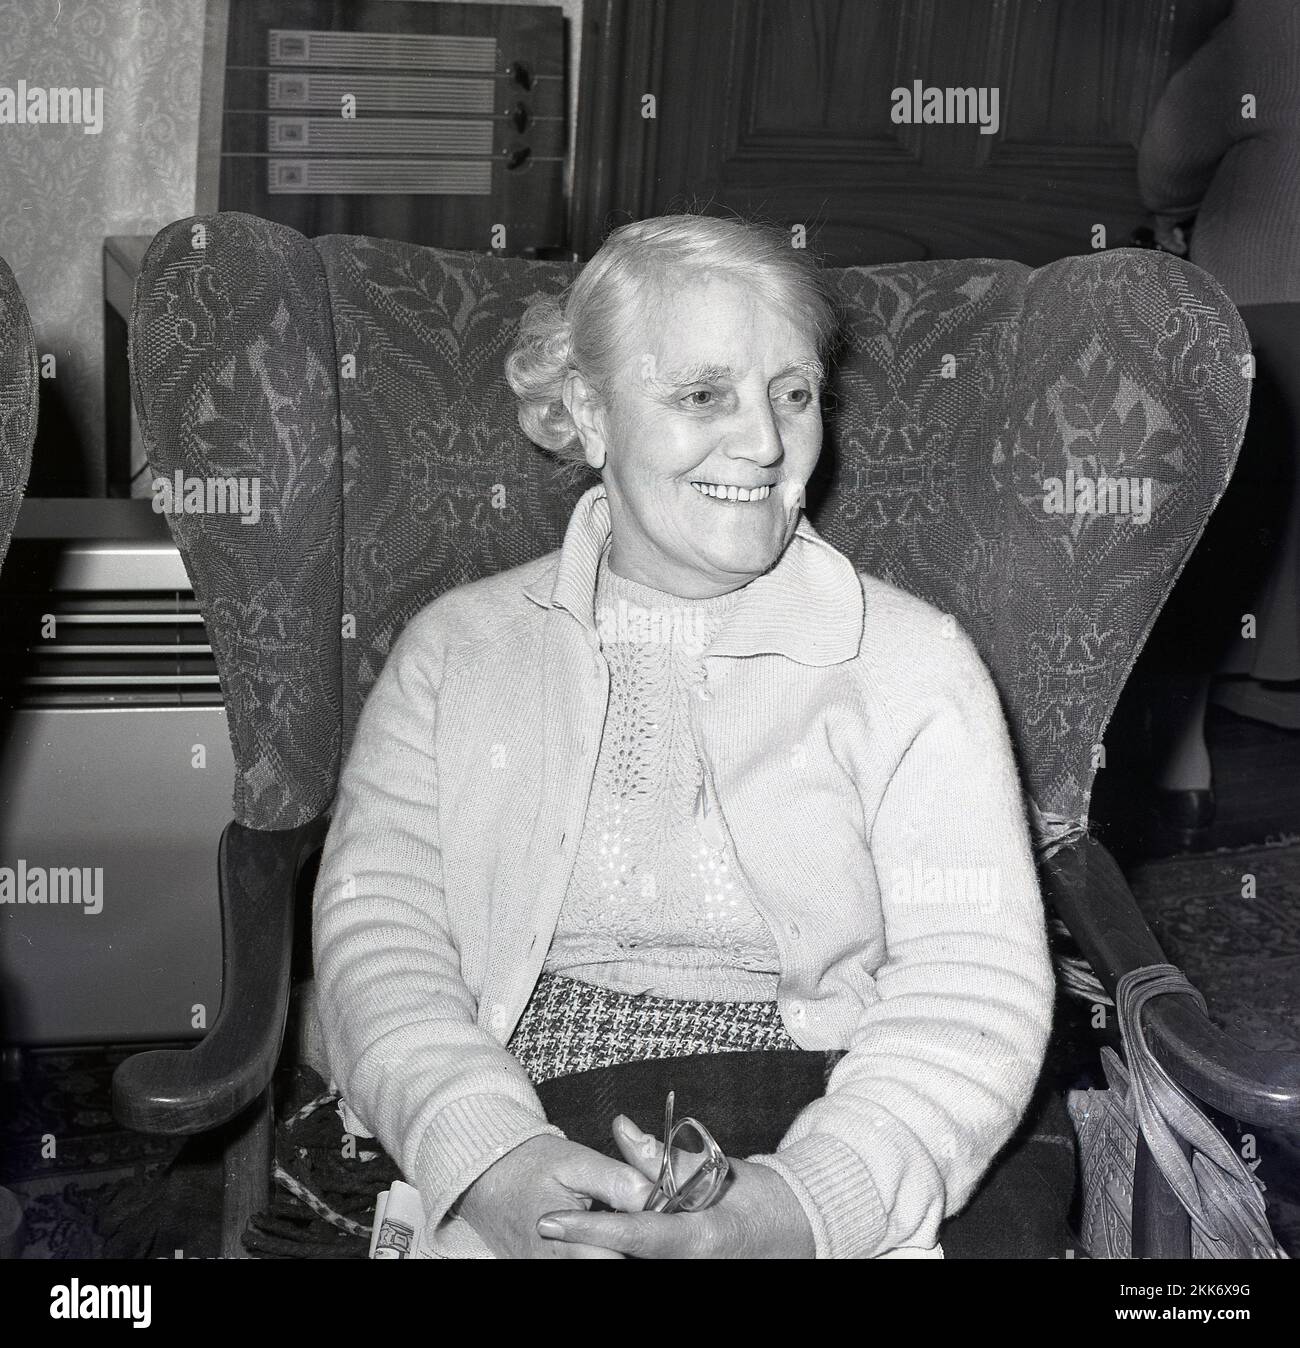 1965, historical, happy elderly lady sitting in a lounge chair in an old peoples home, England, UK. Stock Photo